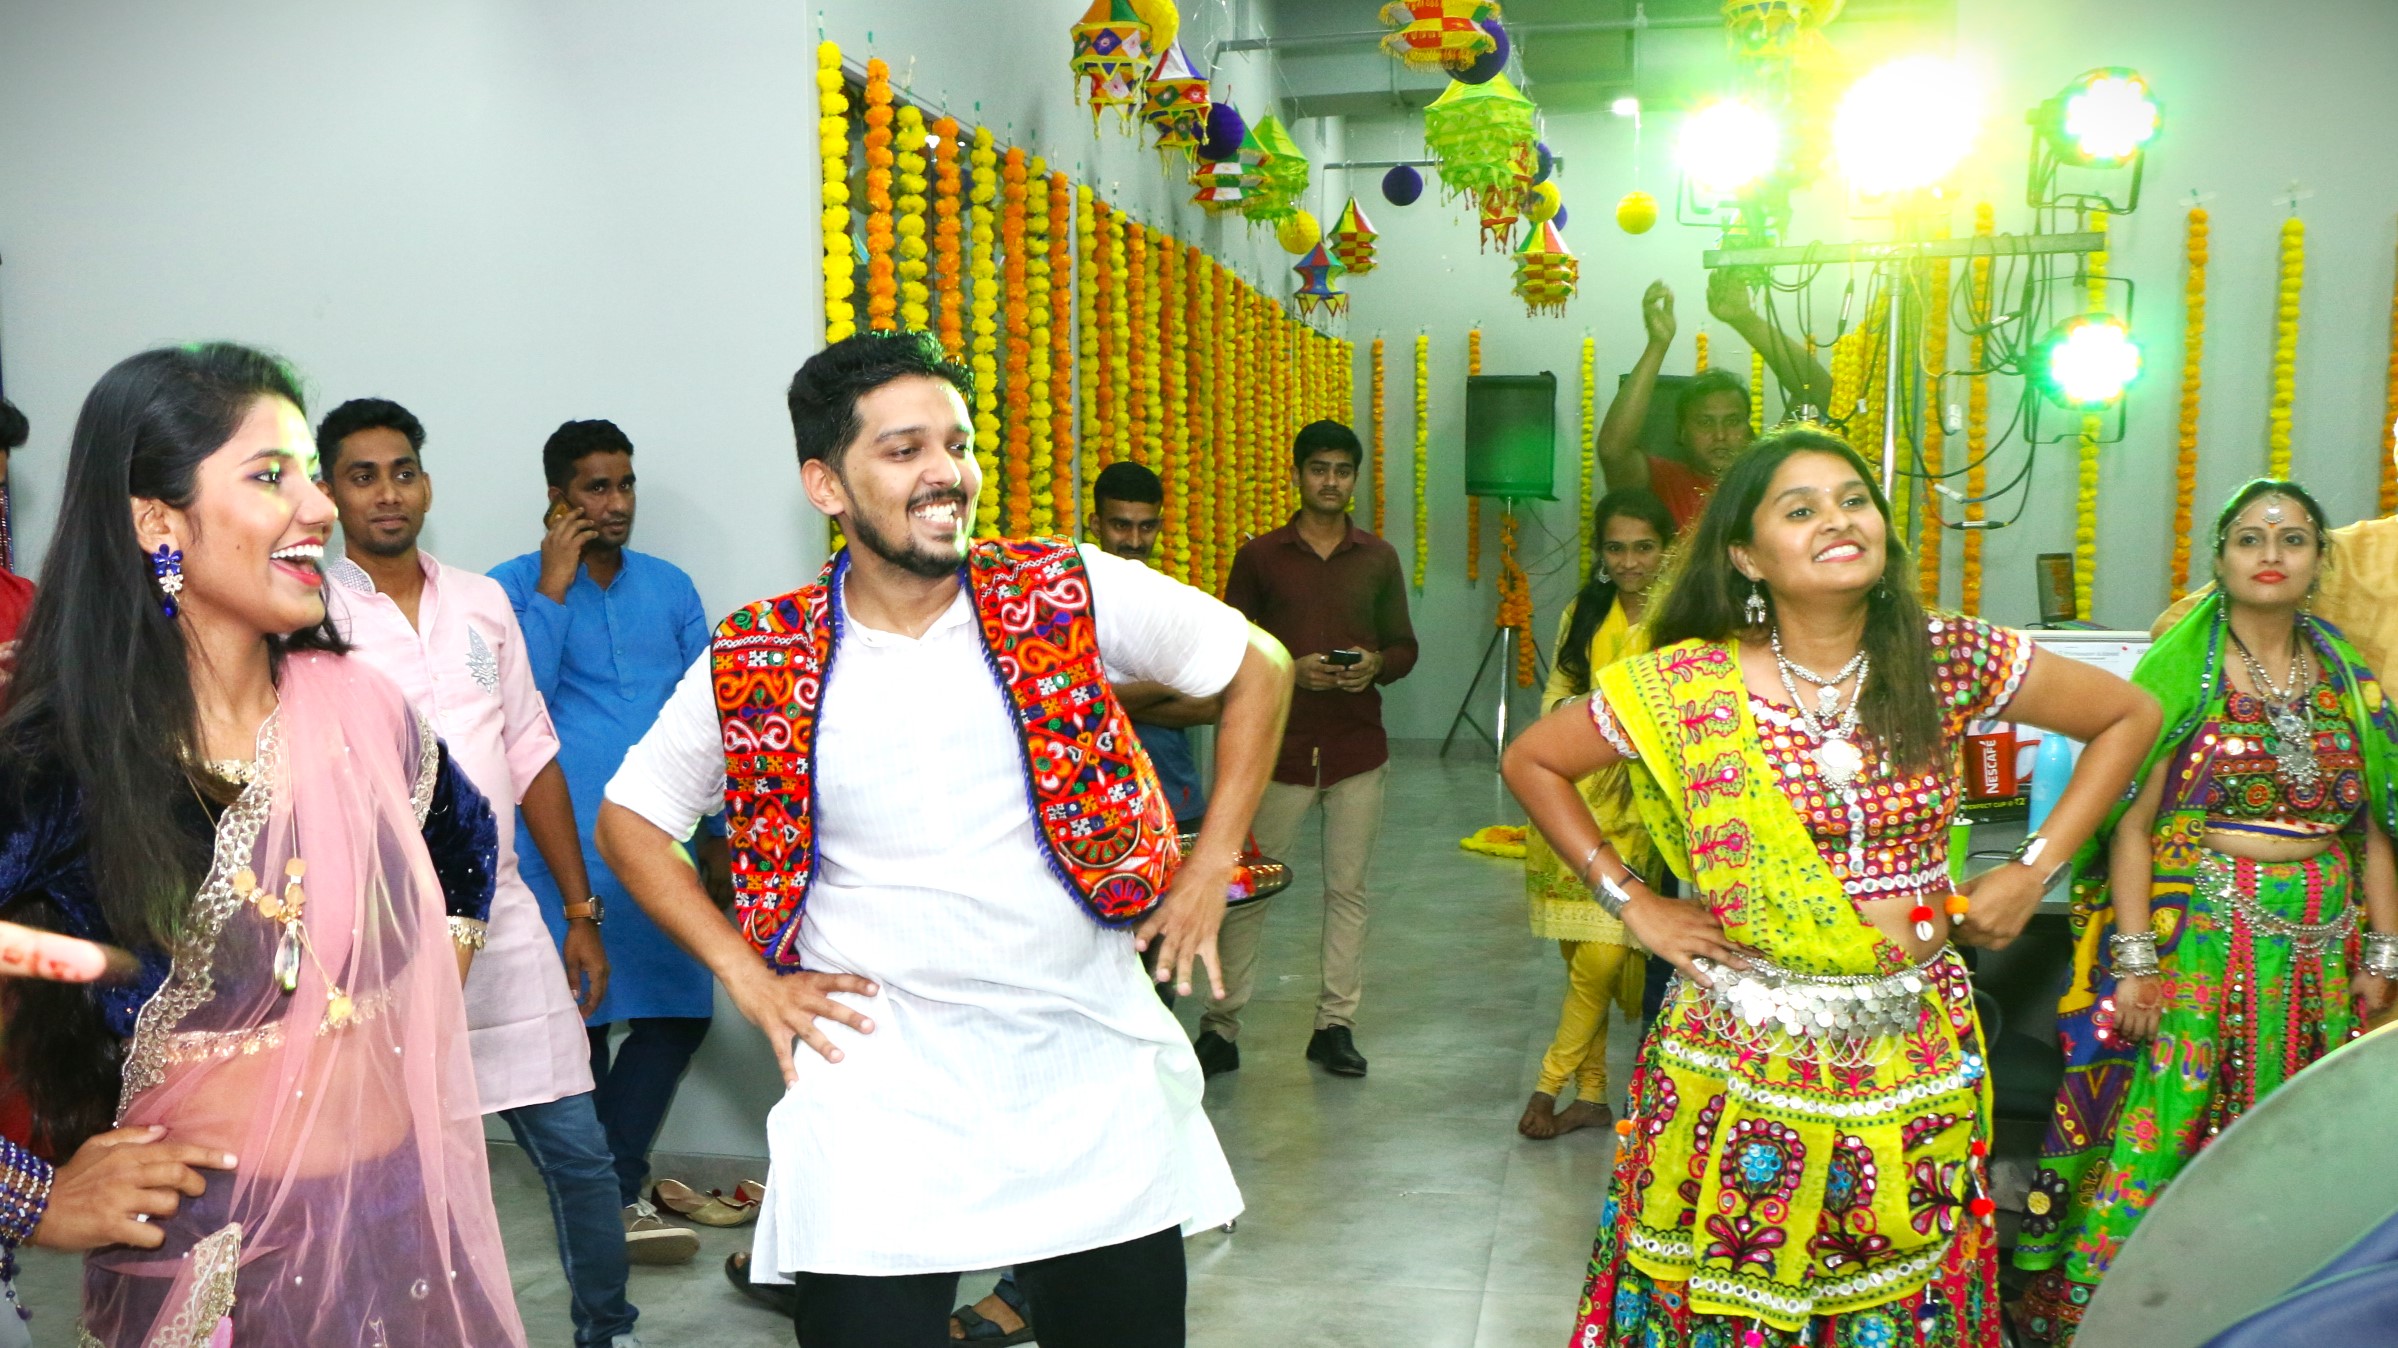 Dussehra Special Corporate Team Building Activities That Transform Your Workplace